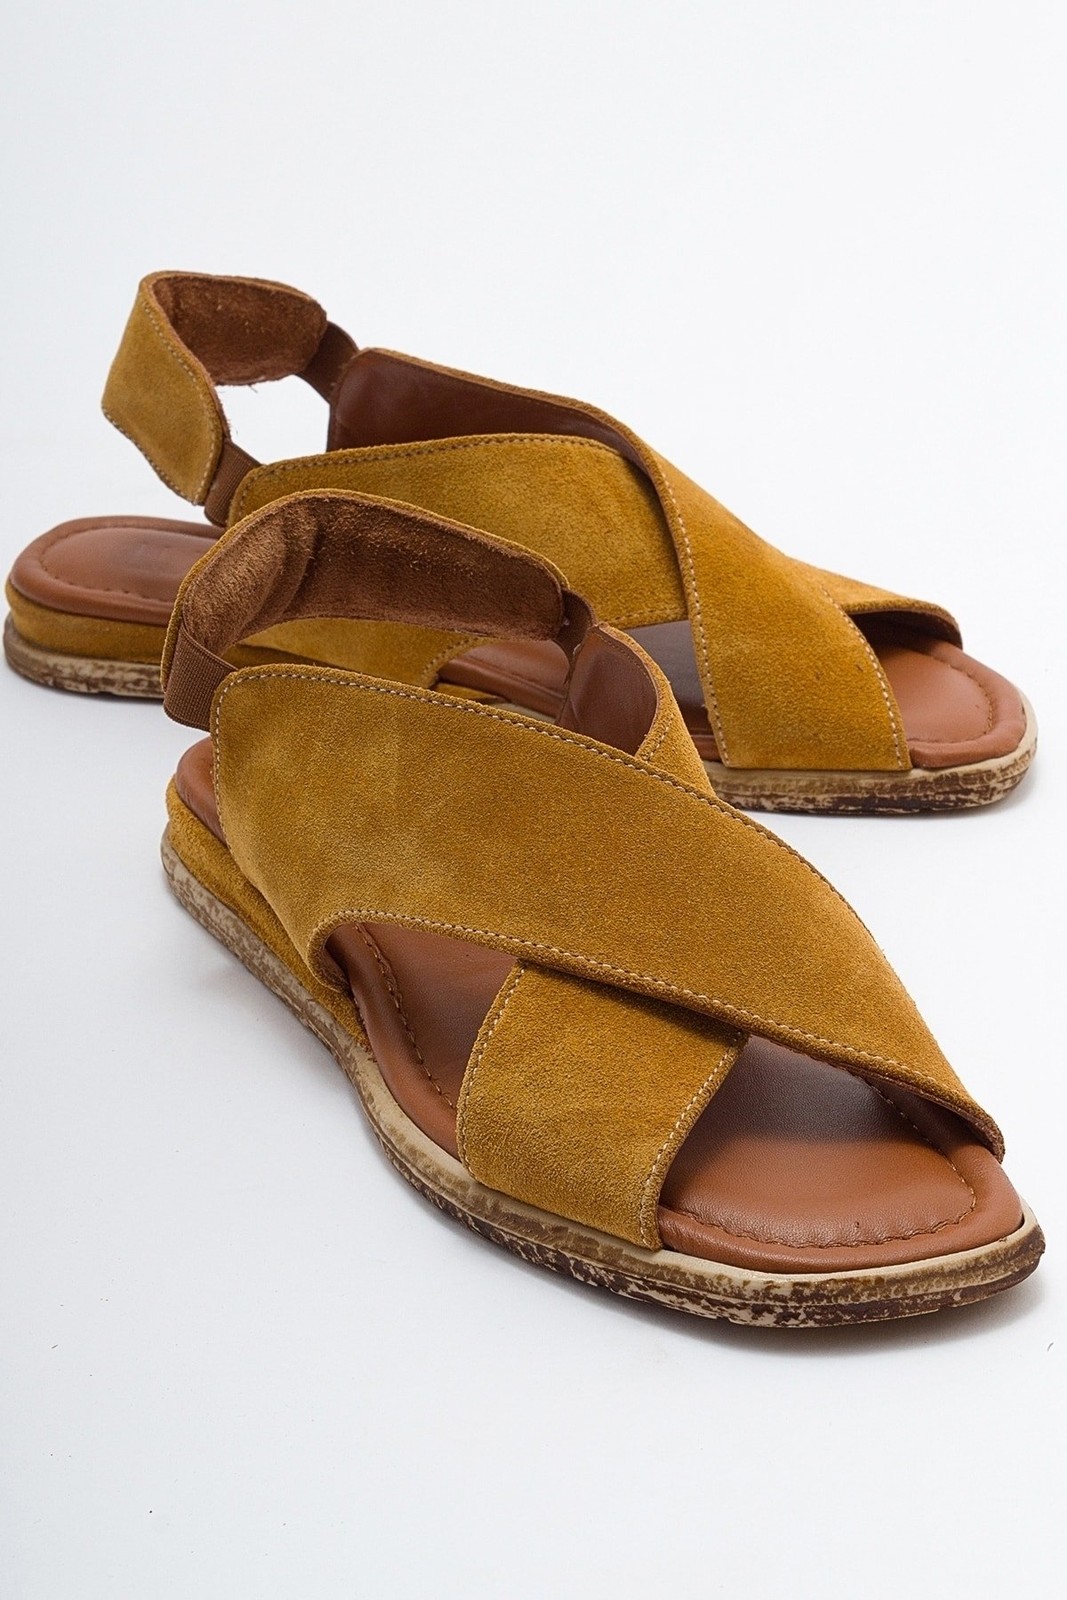 LuviShoes 706 Women's Sandals From Genuine Leather and Mustard Suede.